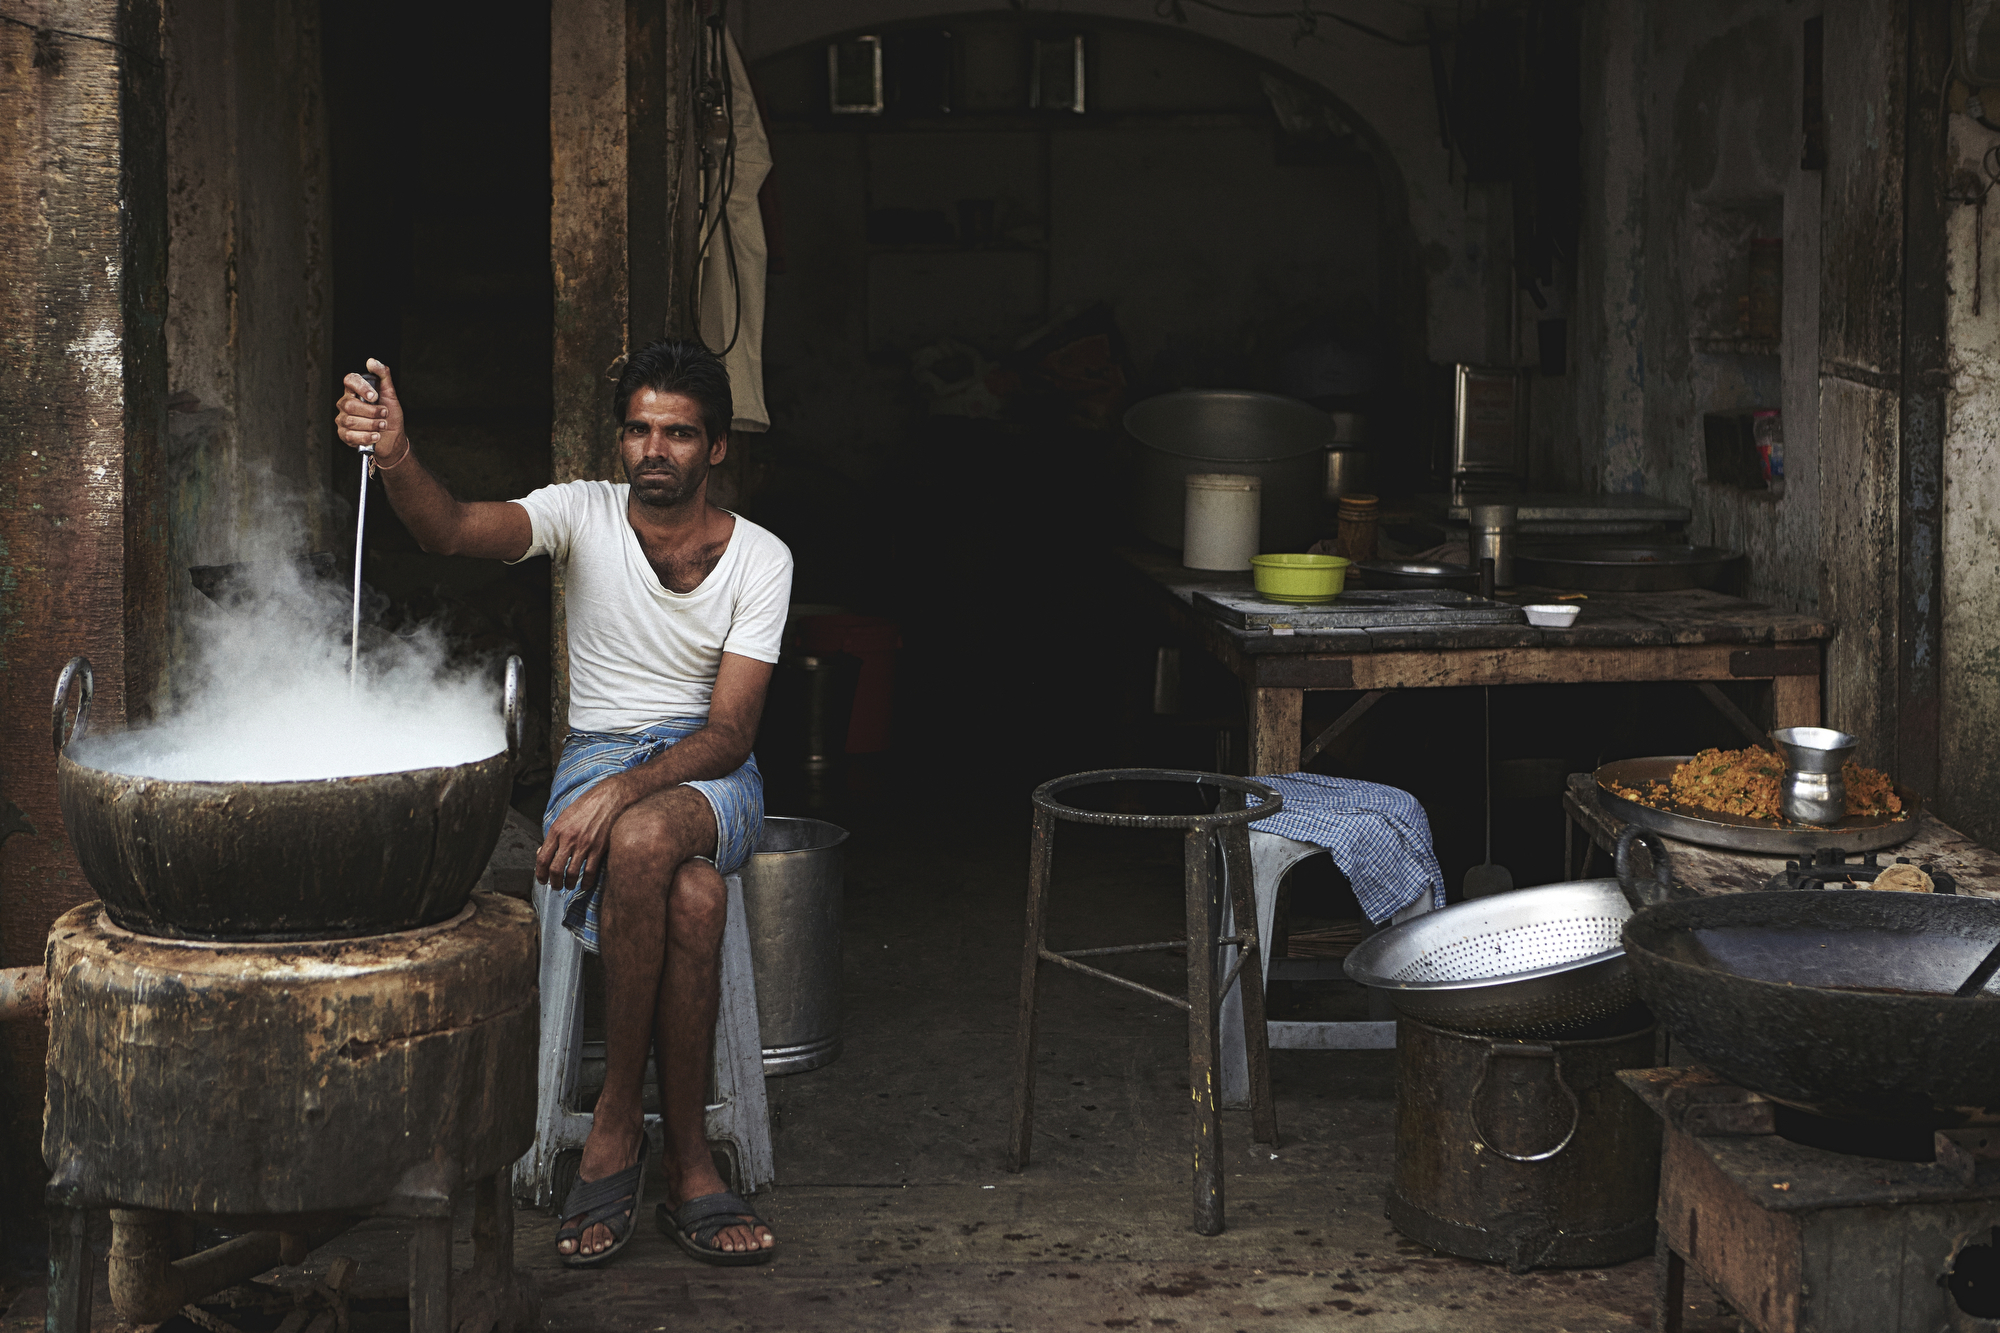 A resident of Bagru, the village which inspired the casual comfort feel of the collection.